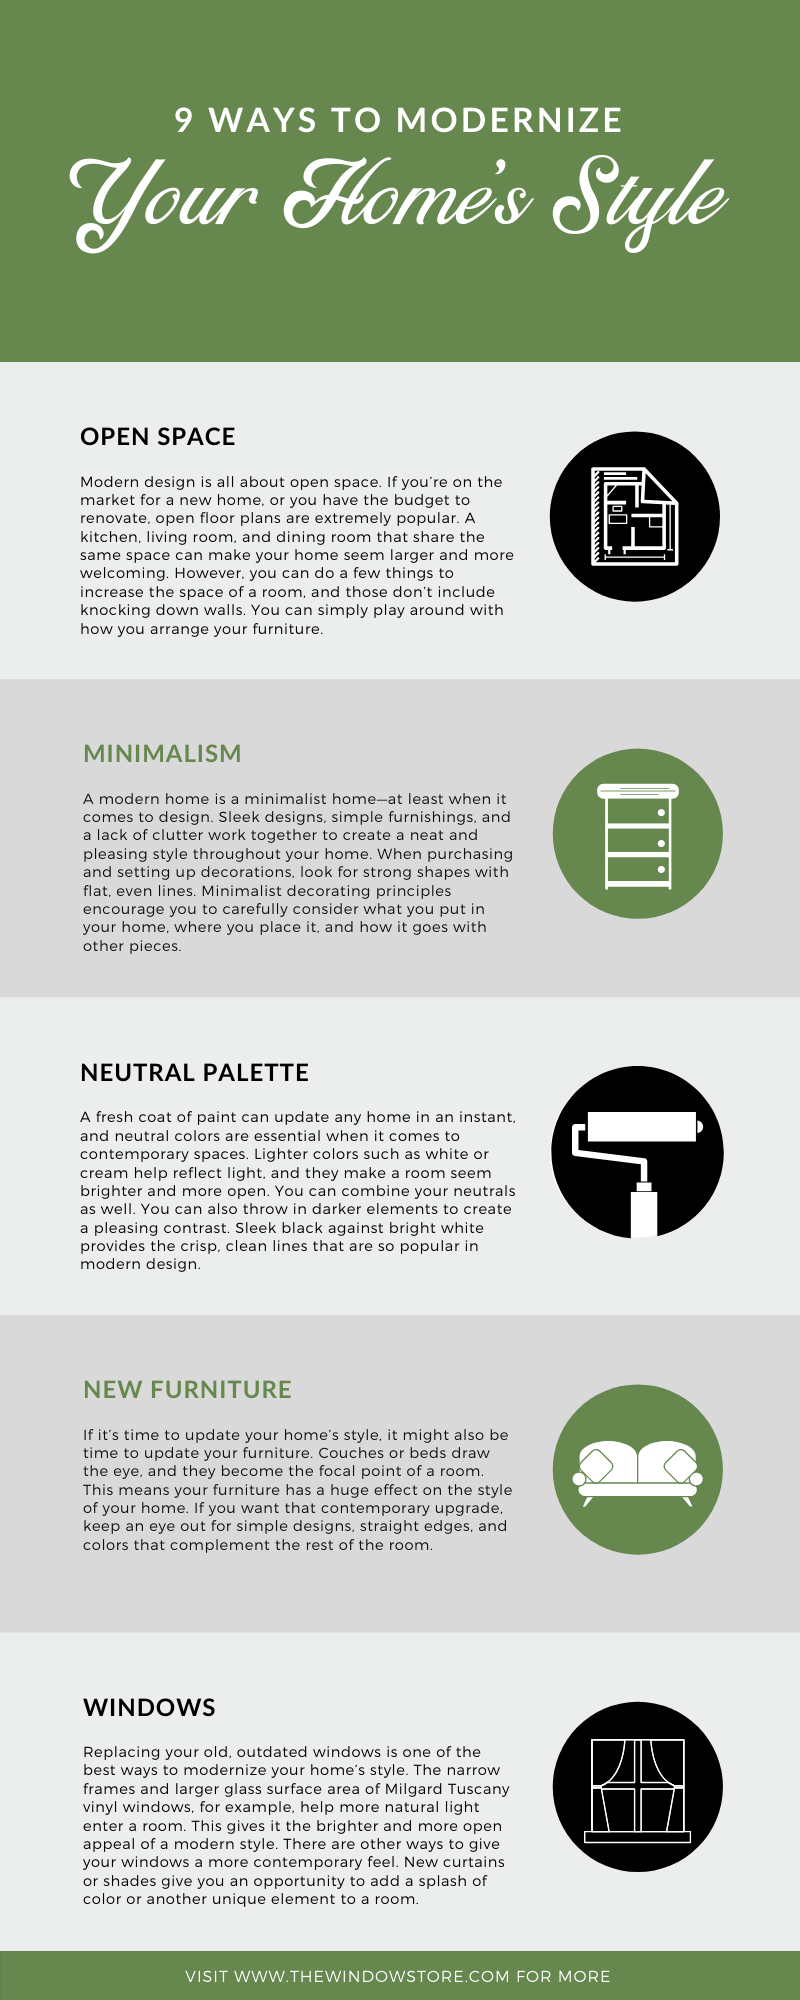 9 Ways to Modernize Your Home’s Style infographic